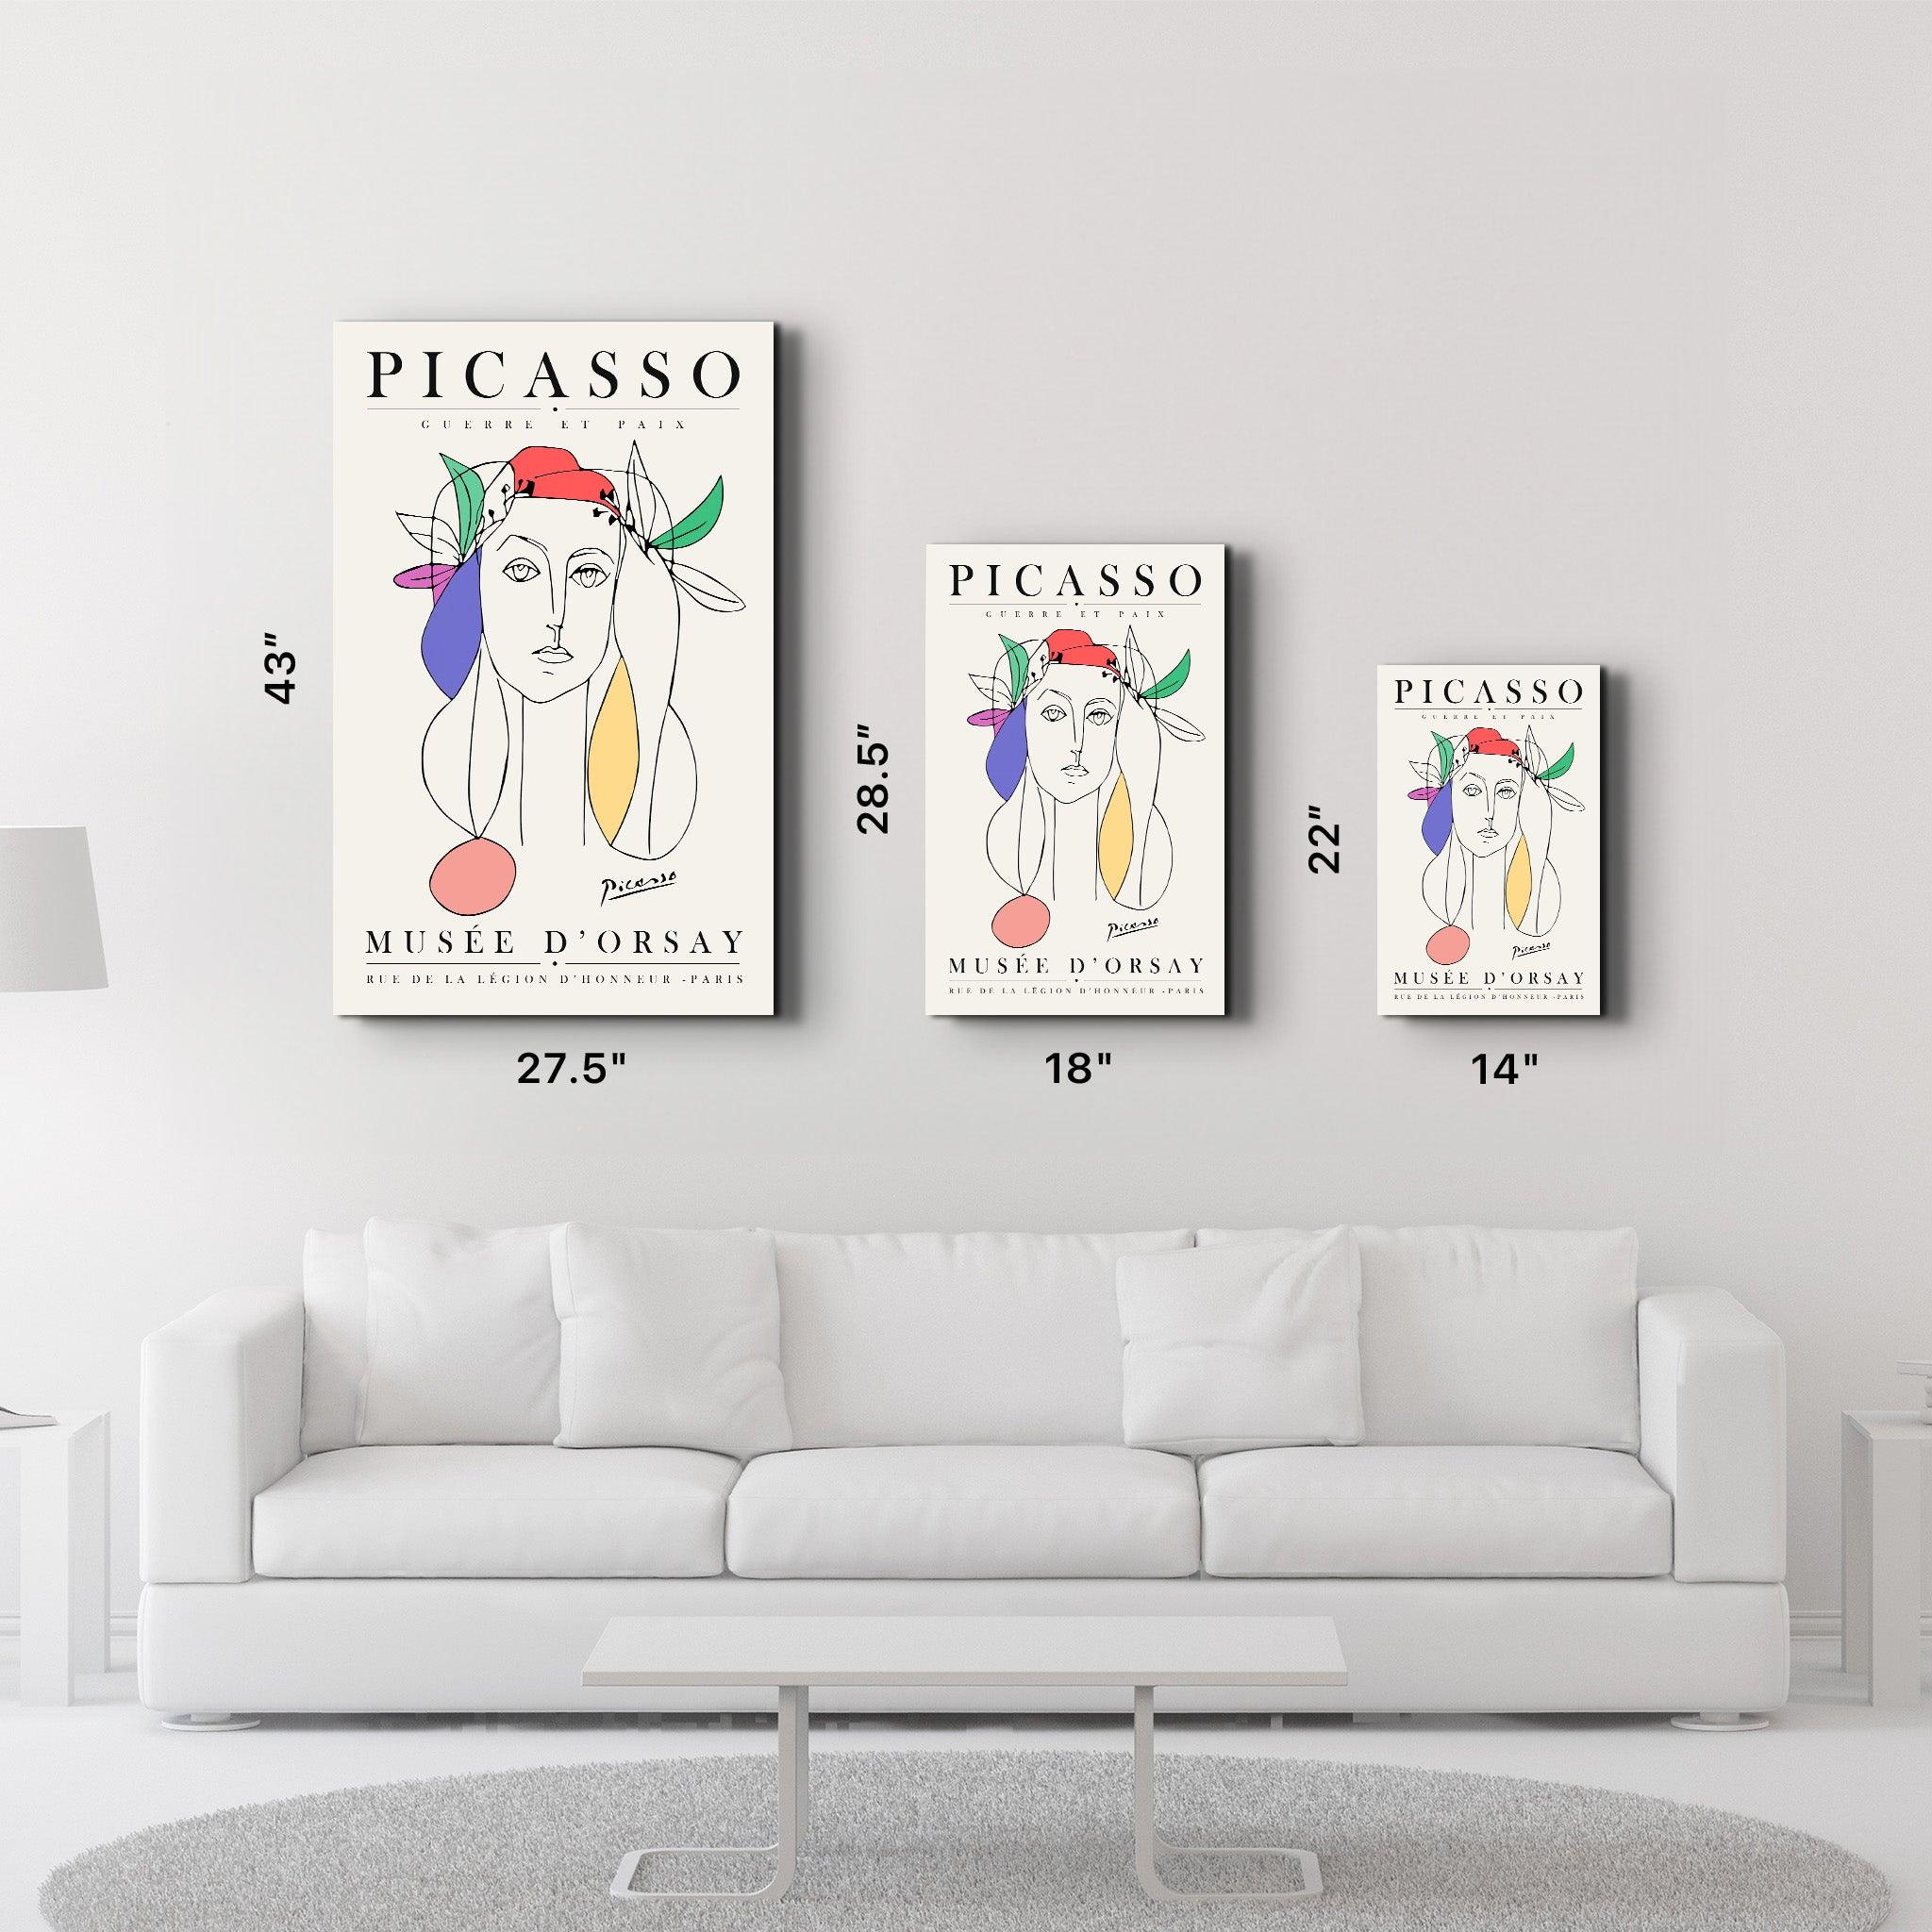 Pablo Picasso - Guerre Et Paix | Gallery Print Collection Glass Wall Art - ArtDesigna Glass Printing Wall Art